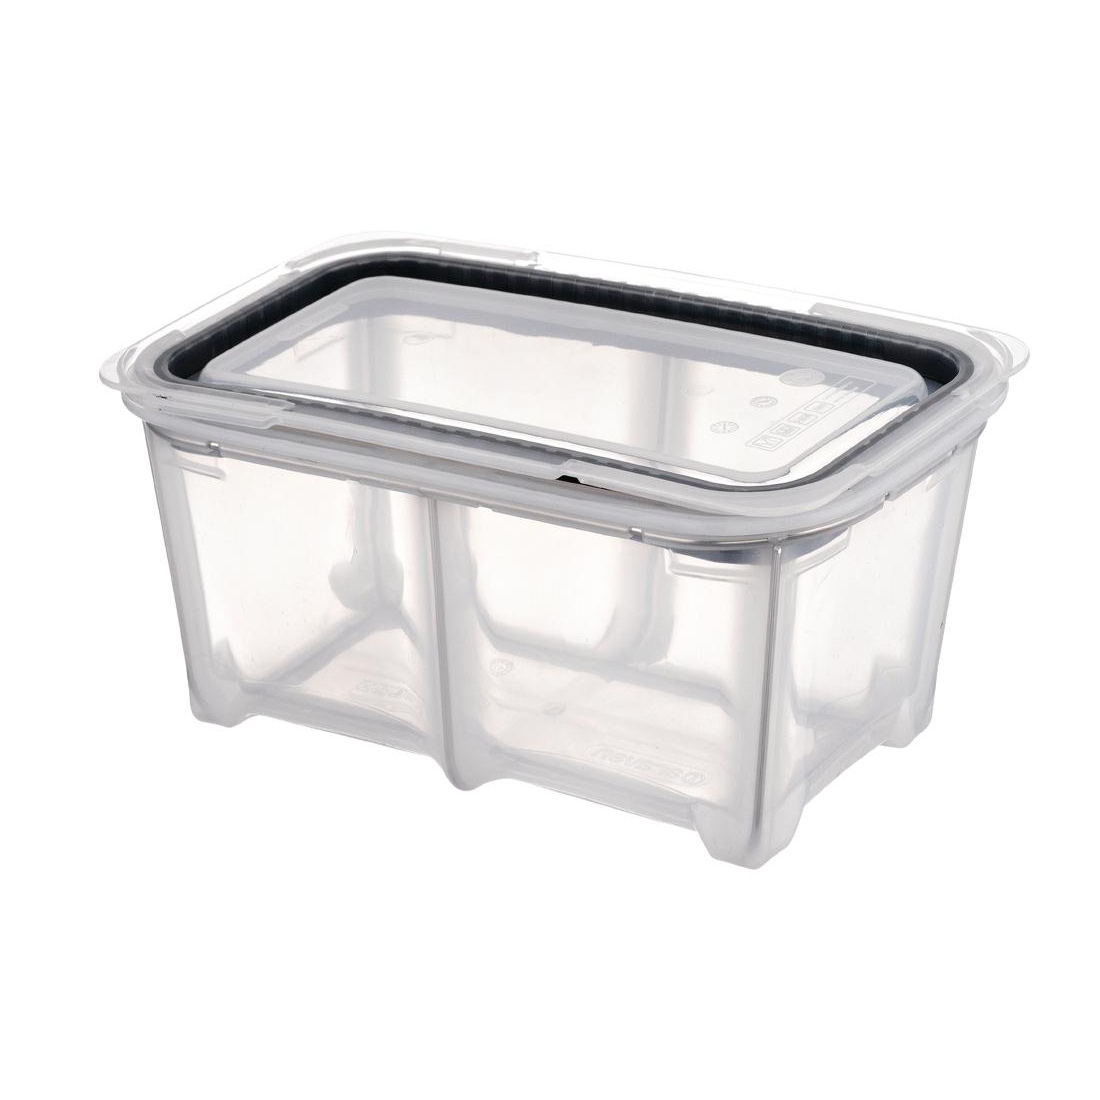 Araven 1/3 GN Silicone Gastronorm Food Container 5.2L